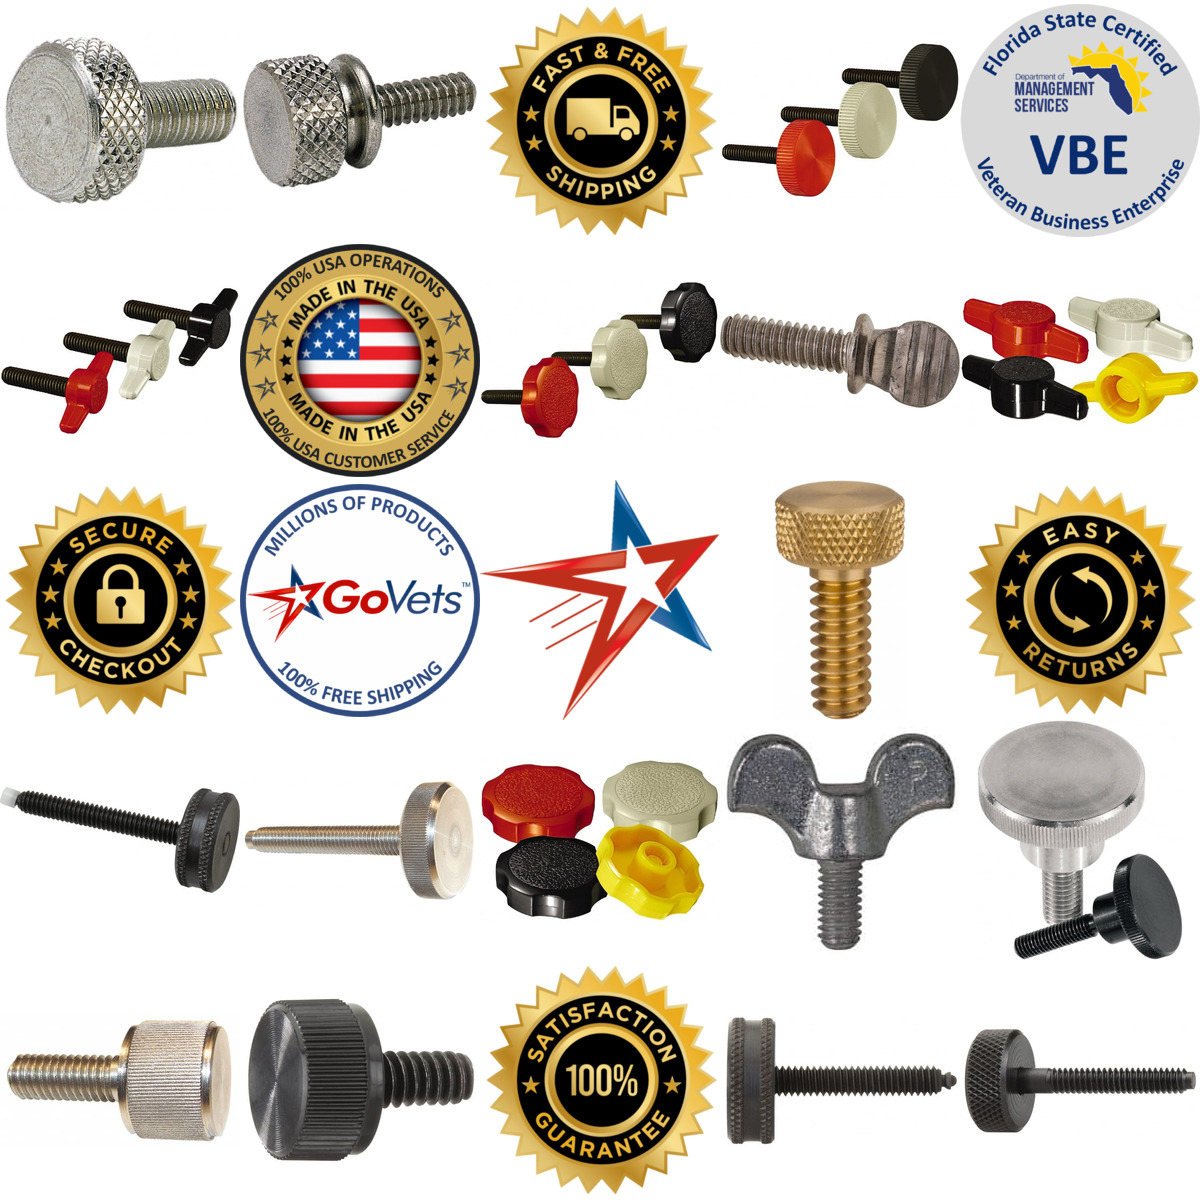 A selection of Thumb Screws and Hand Knobs products on GoVets